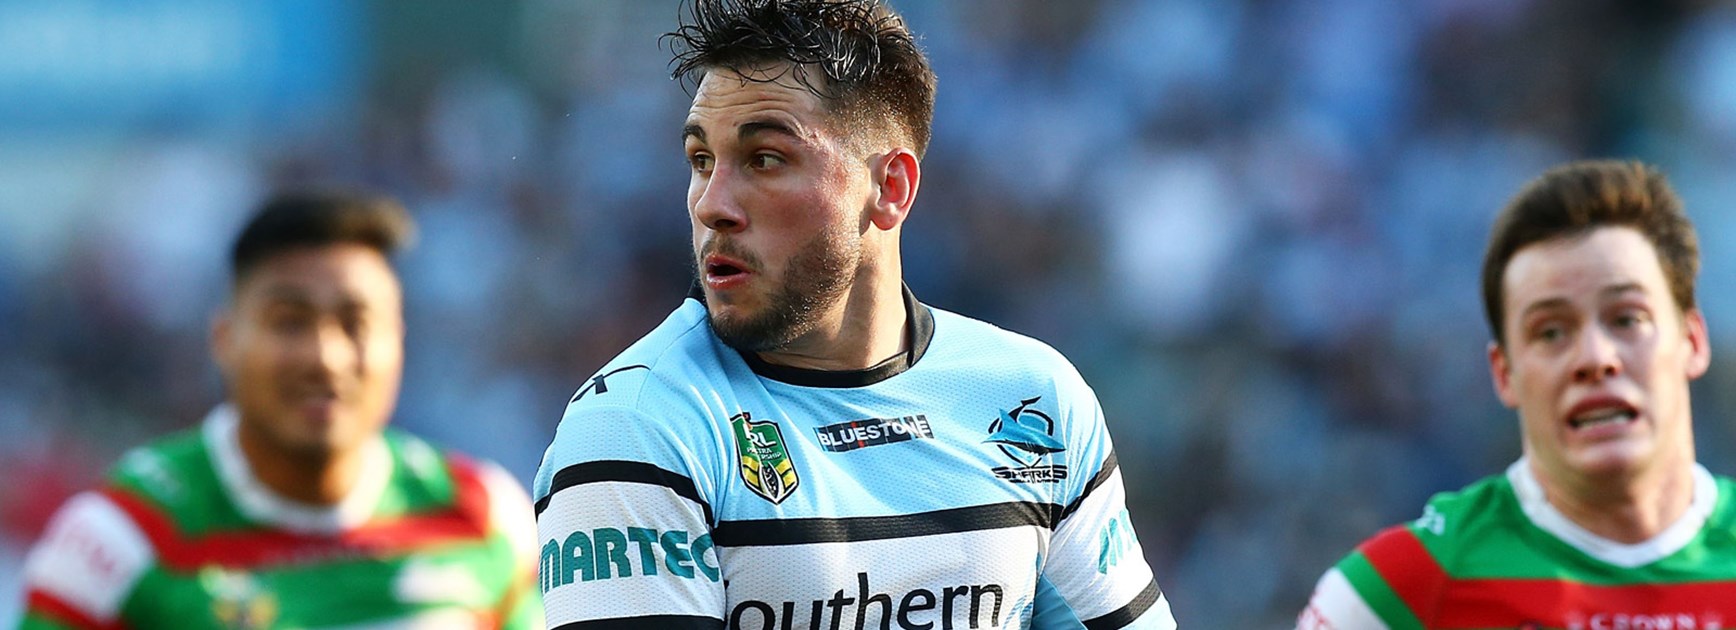 Jack Bird scored an incredible solo try against the Rabbitohs in the first week of the 2015 finals series.